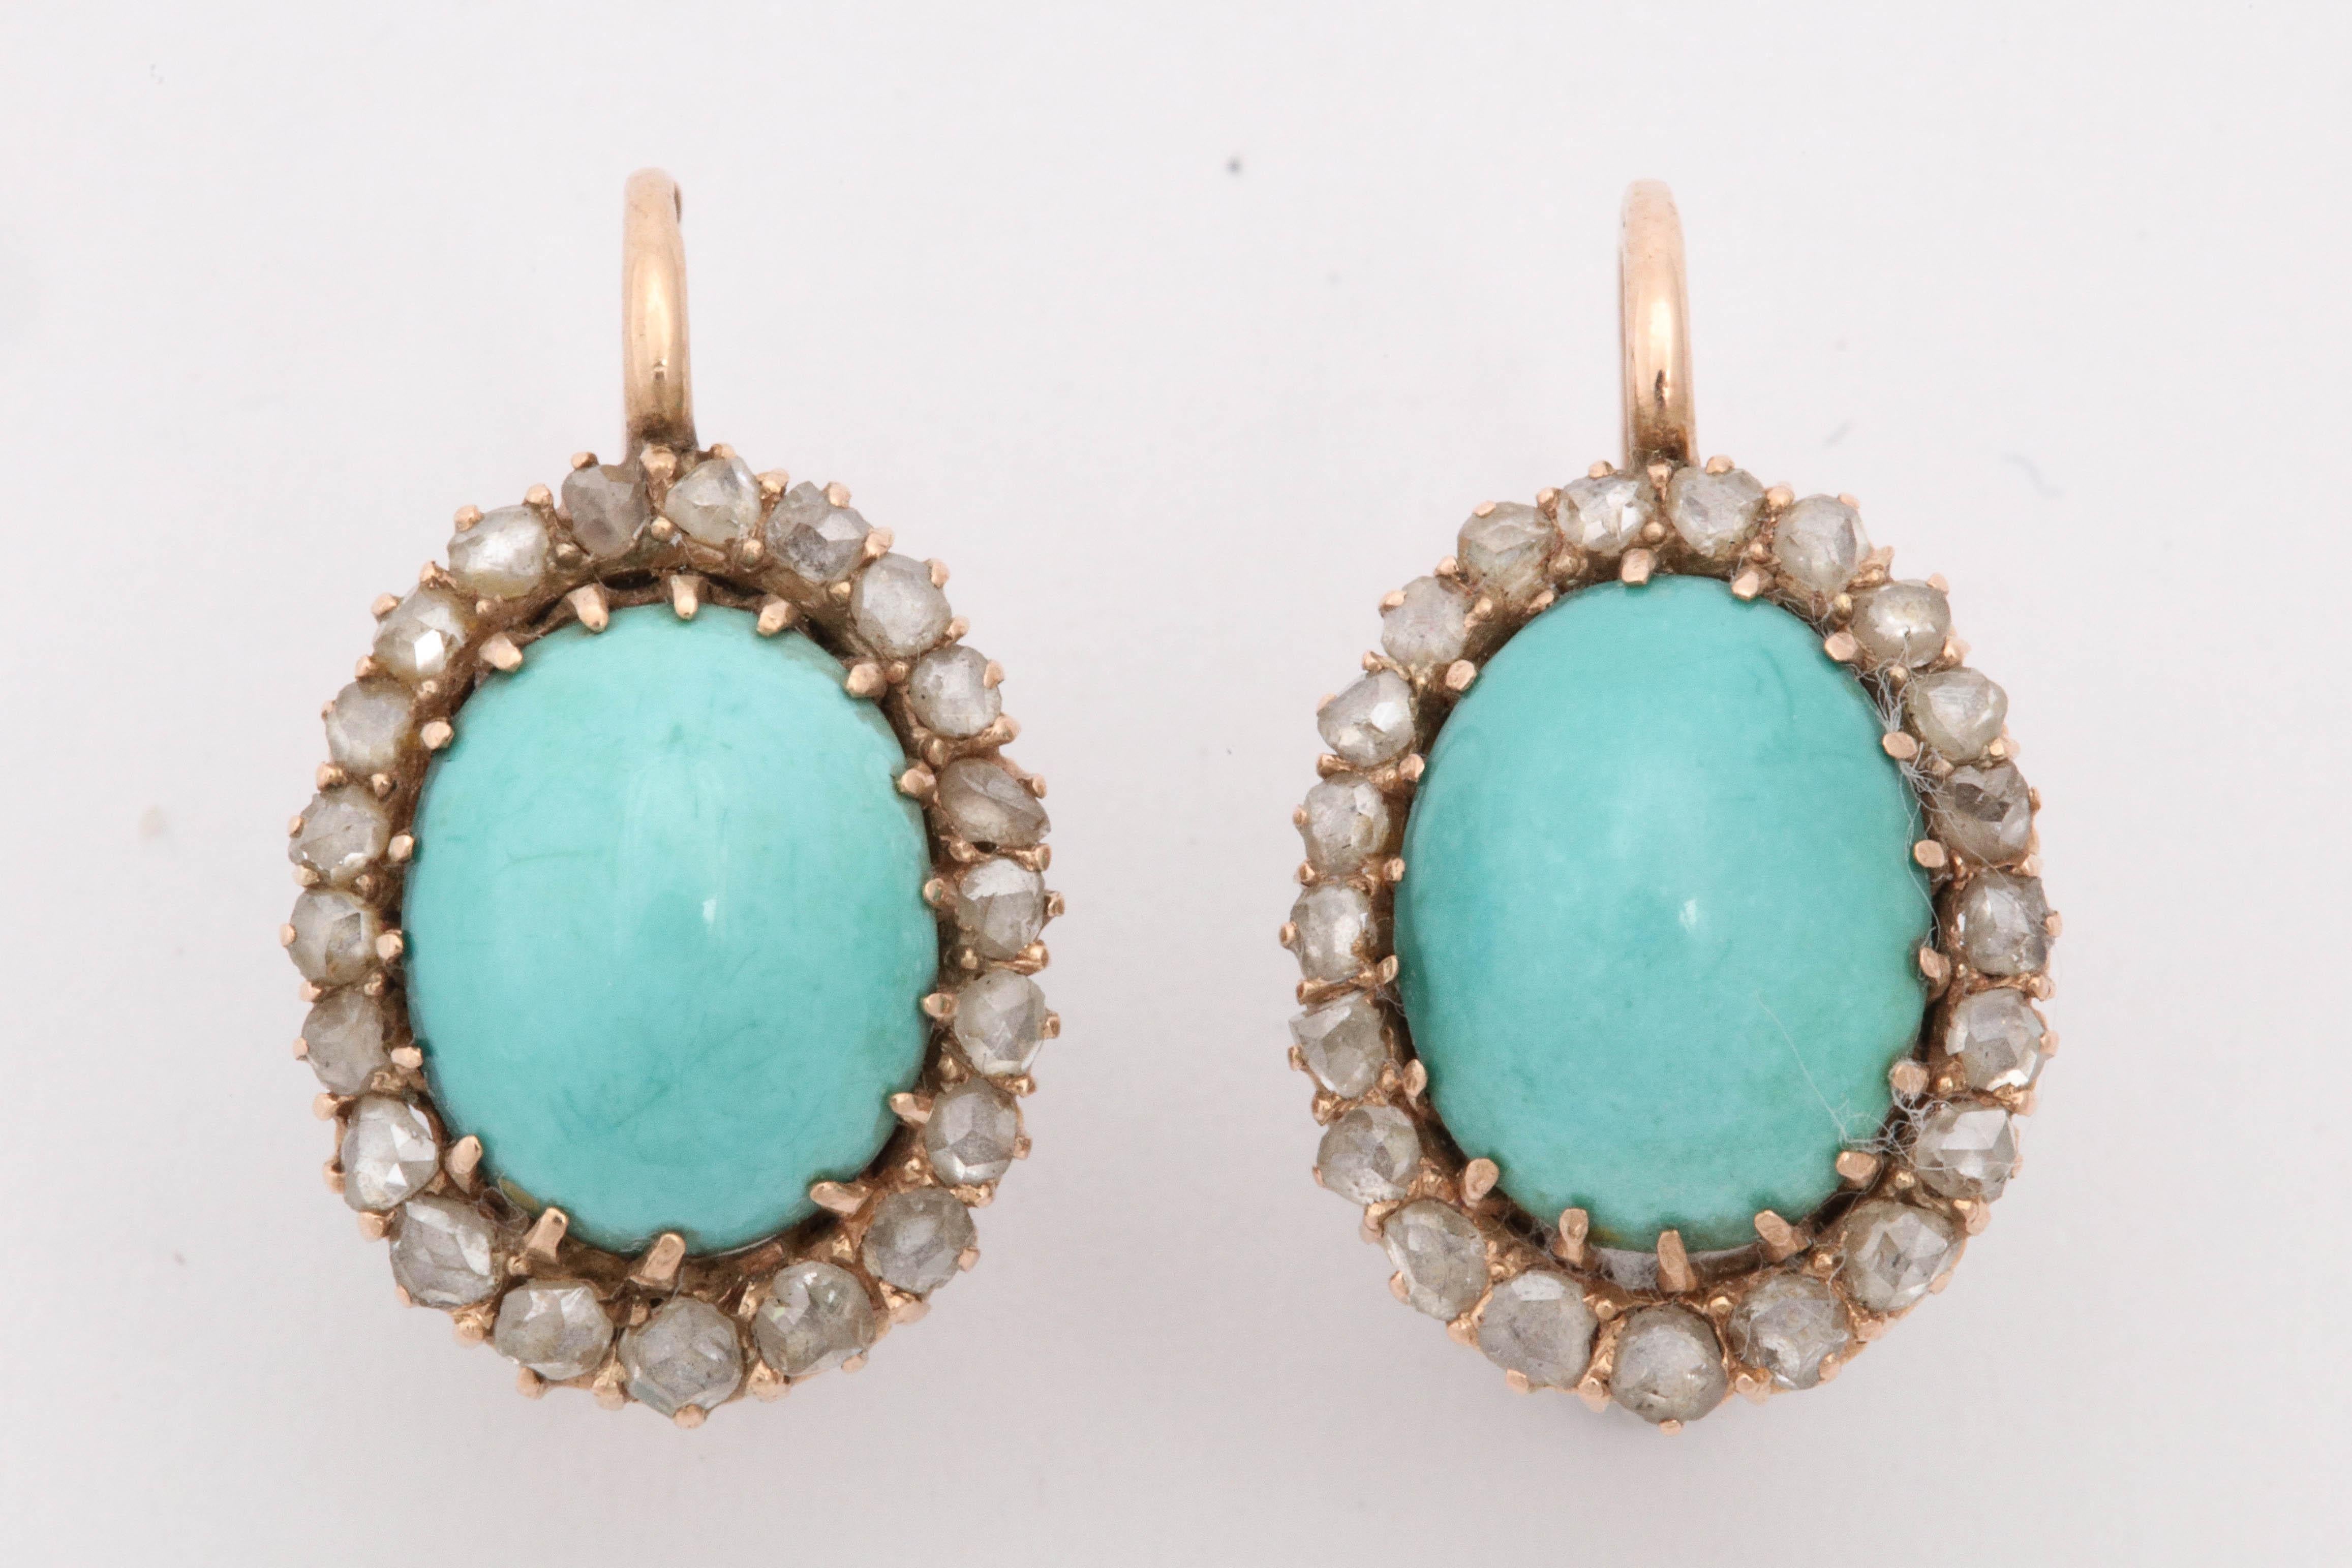 One Pair Of Ladies Handmade 18kt Gold Dangle Drop Earrings Embellished With [2] Large Oval Cut Cabochon Turquoise Stones Measuring Approximately 12 MM Each Stone. Further Designed With Numerous Crown Set Rose Cut Diamonds Weighing Approximately 1.50